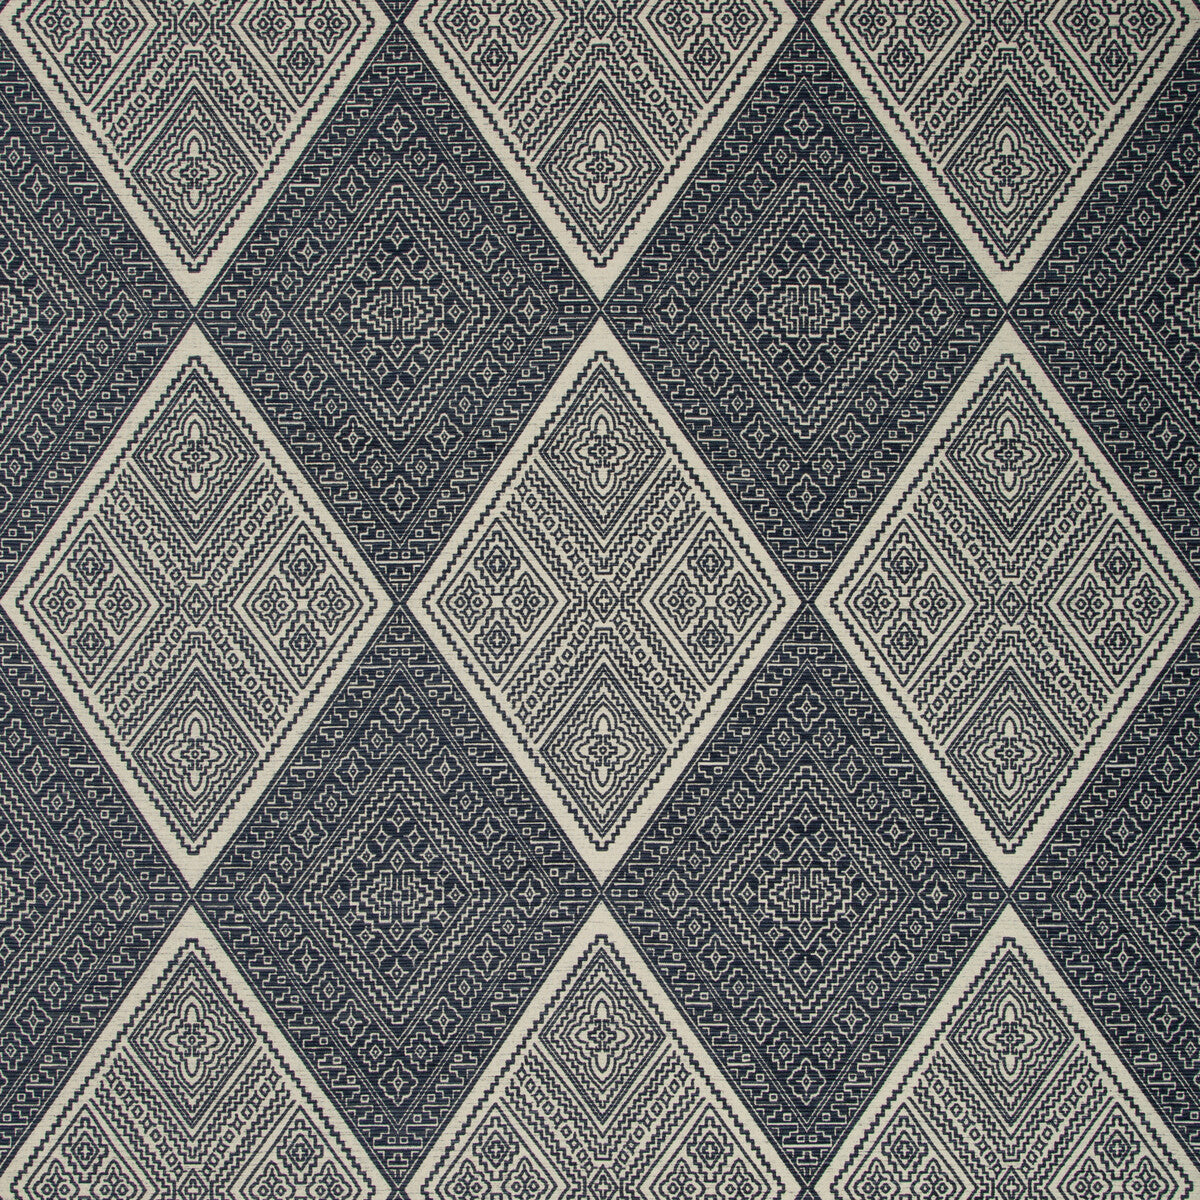 Kravet Design fabric in 35000-5 color - pattern 35000.5.0 - by Kravet Design in the Performance Crypton Home collection